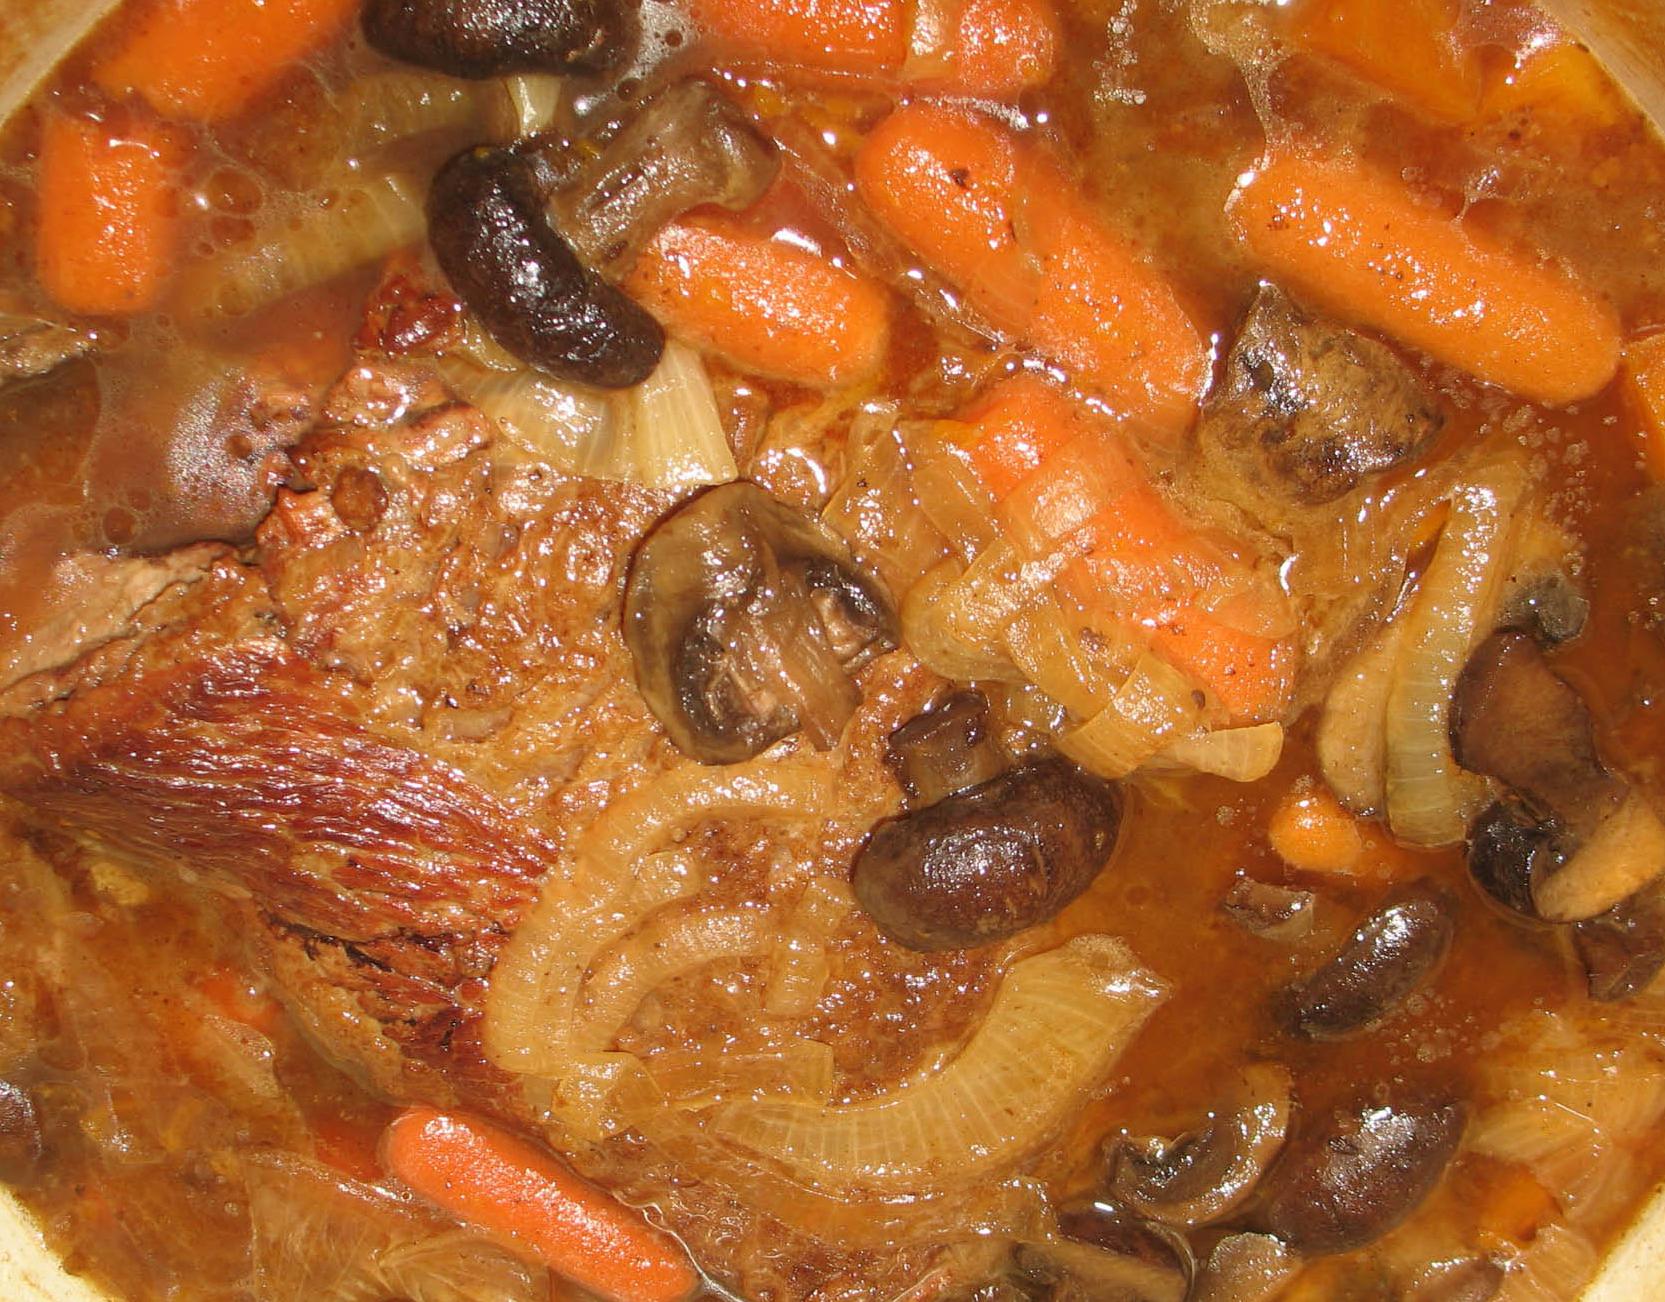  A meal fit for royalty: Wine-Braised Beef.